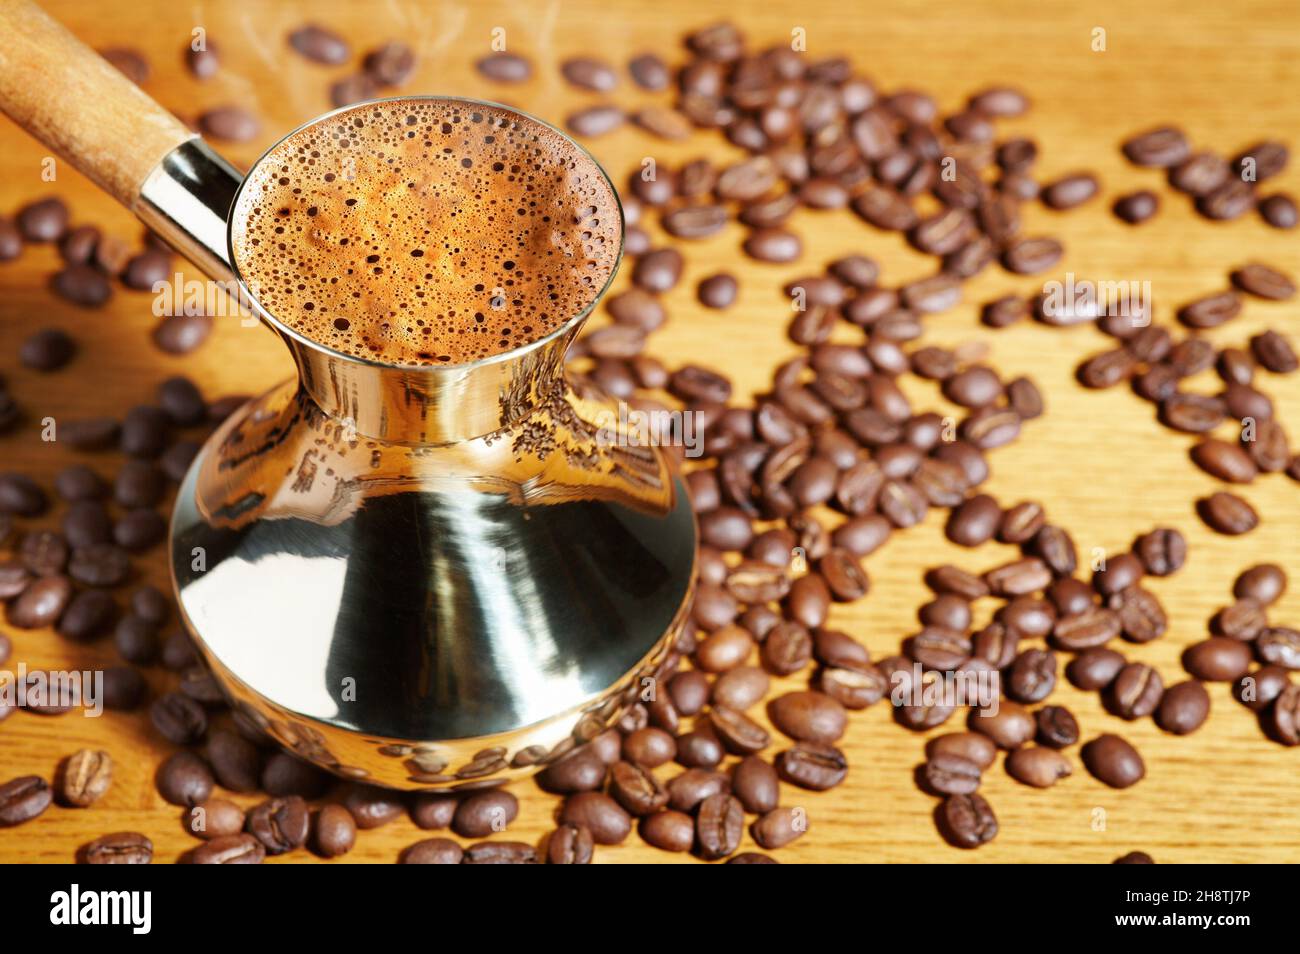 Turkish coffee pot and coffee beans Stock Photo